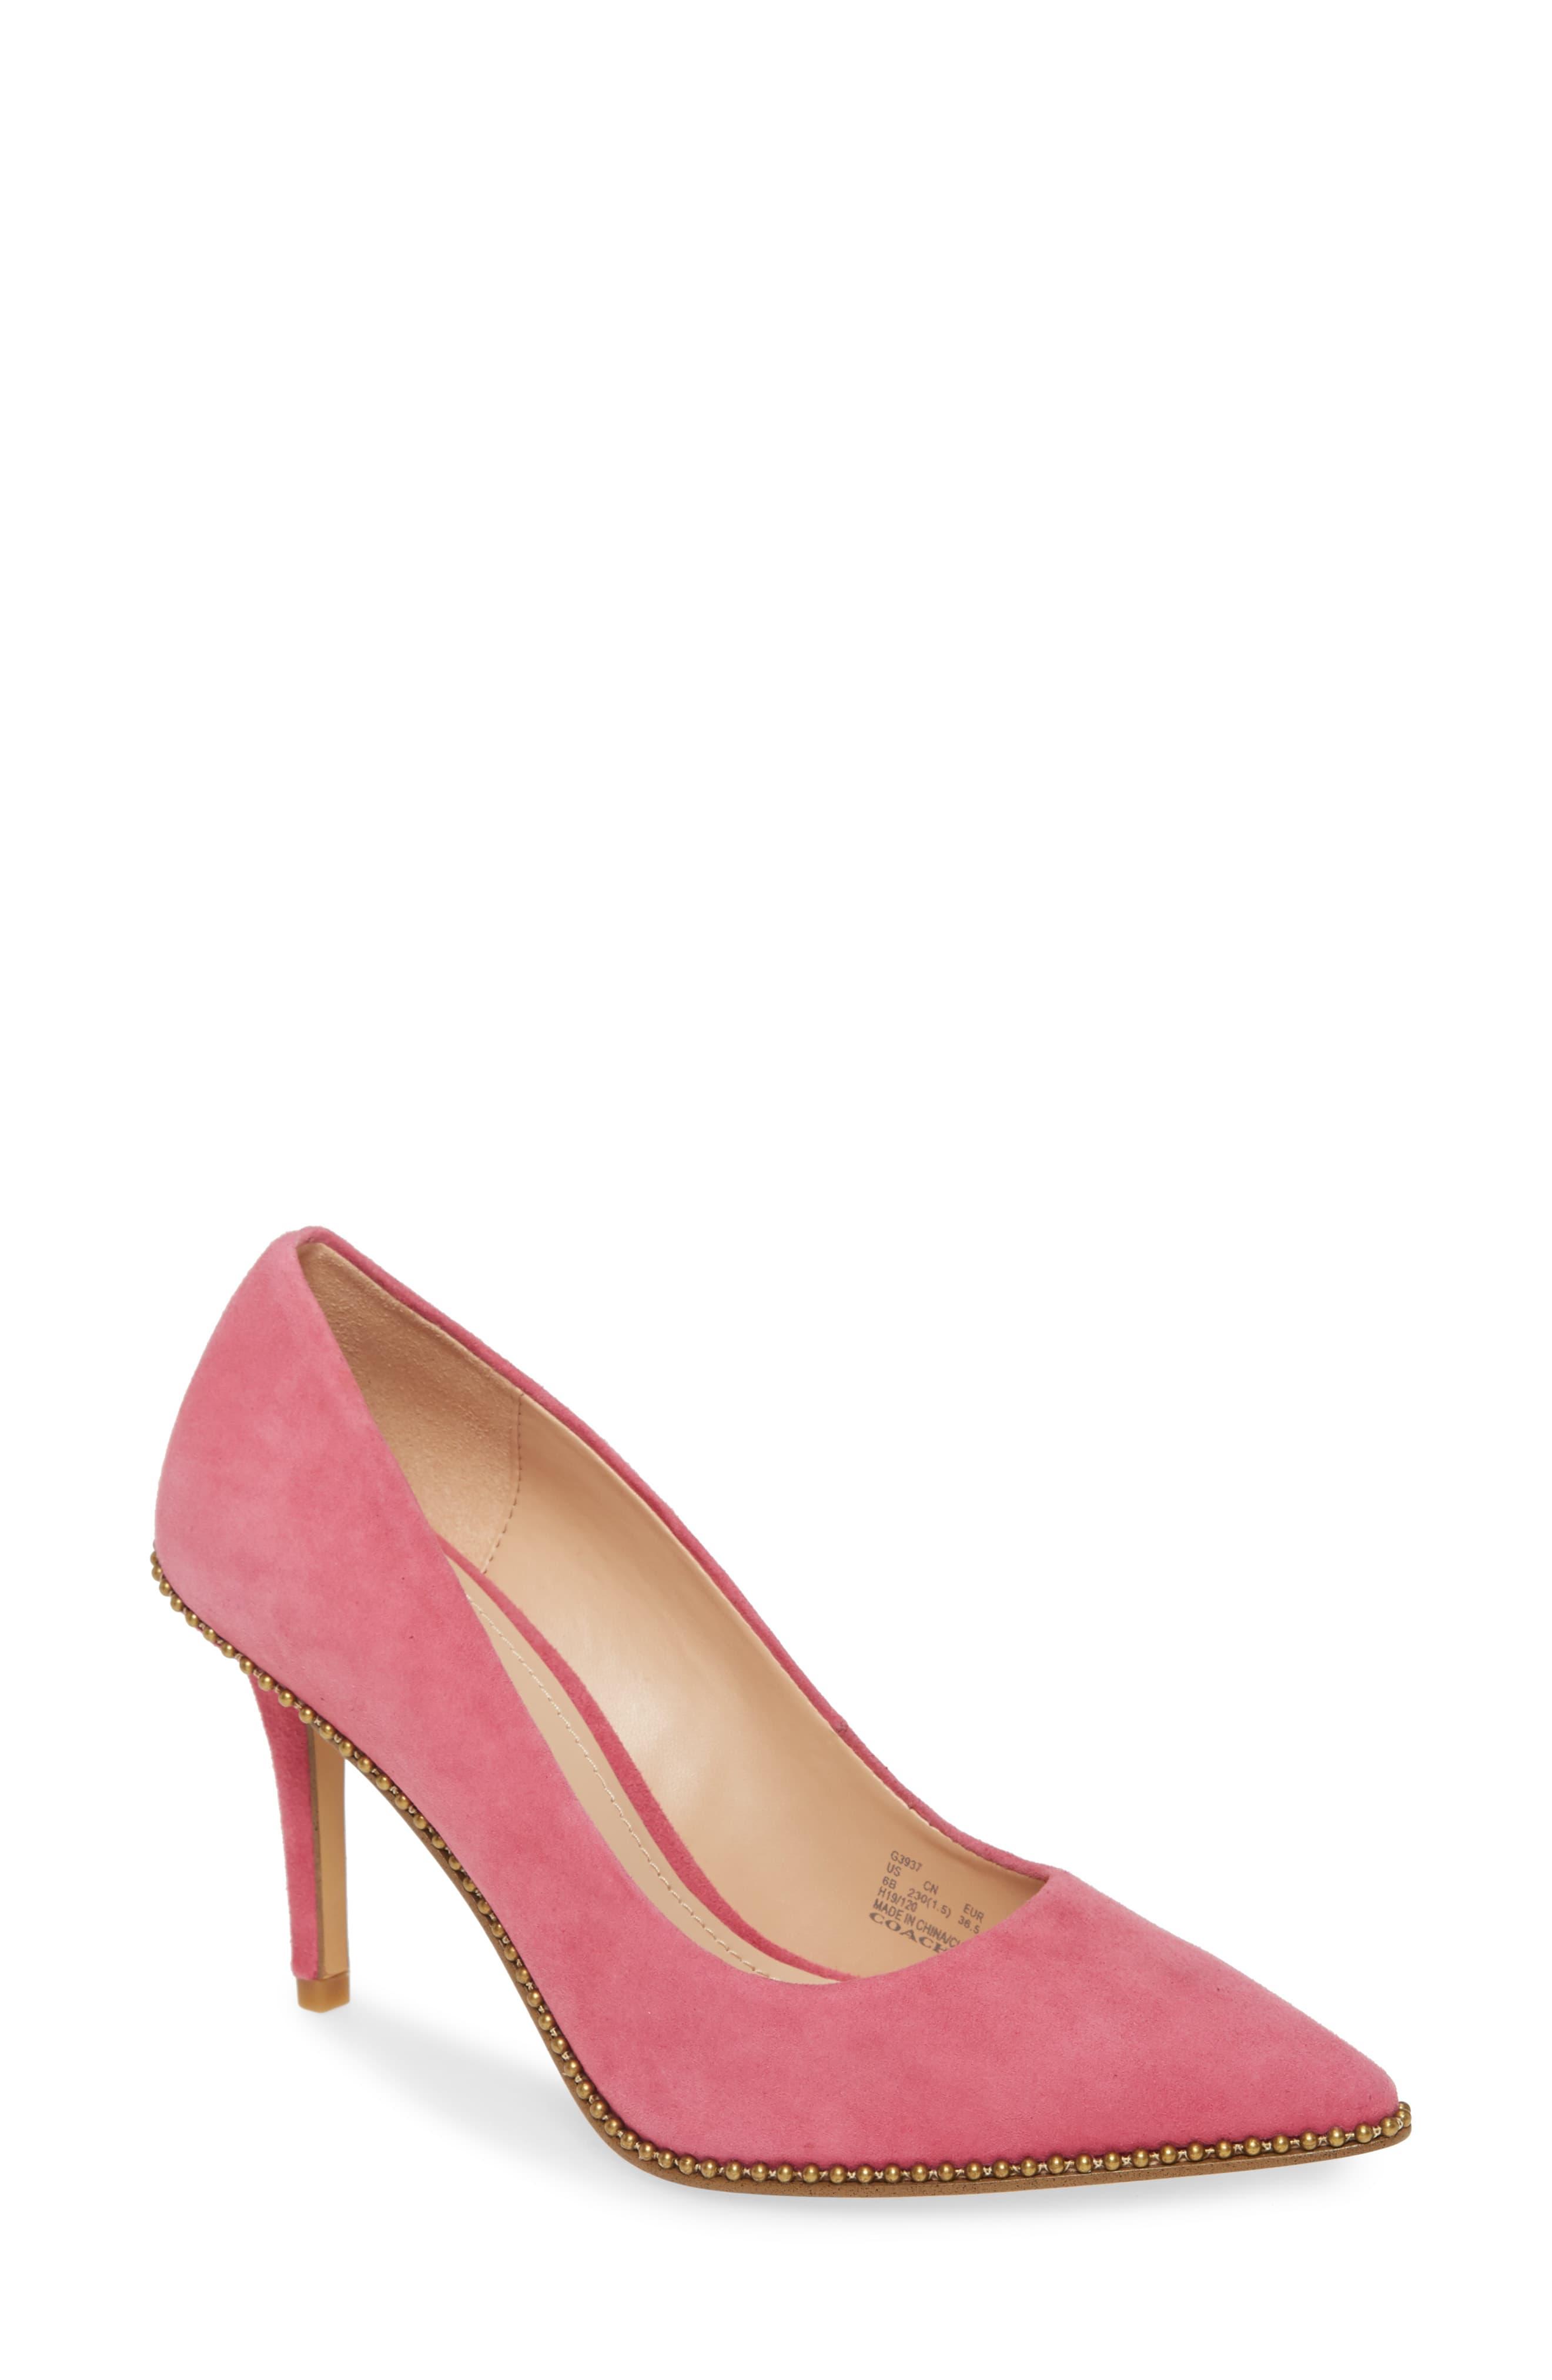 COACH Waverly Pointed Toe Pump in Pink - Lyst